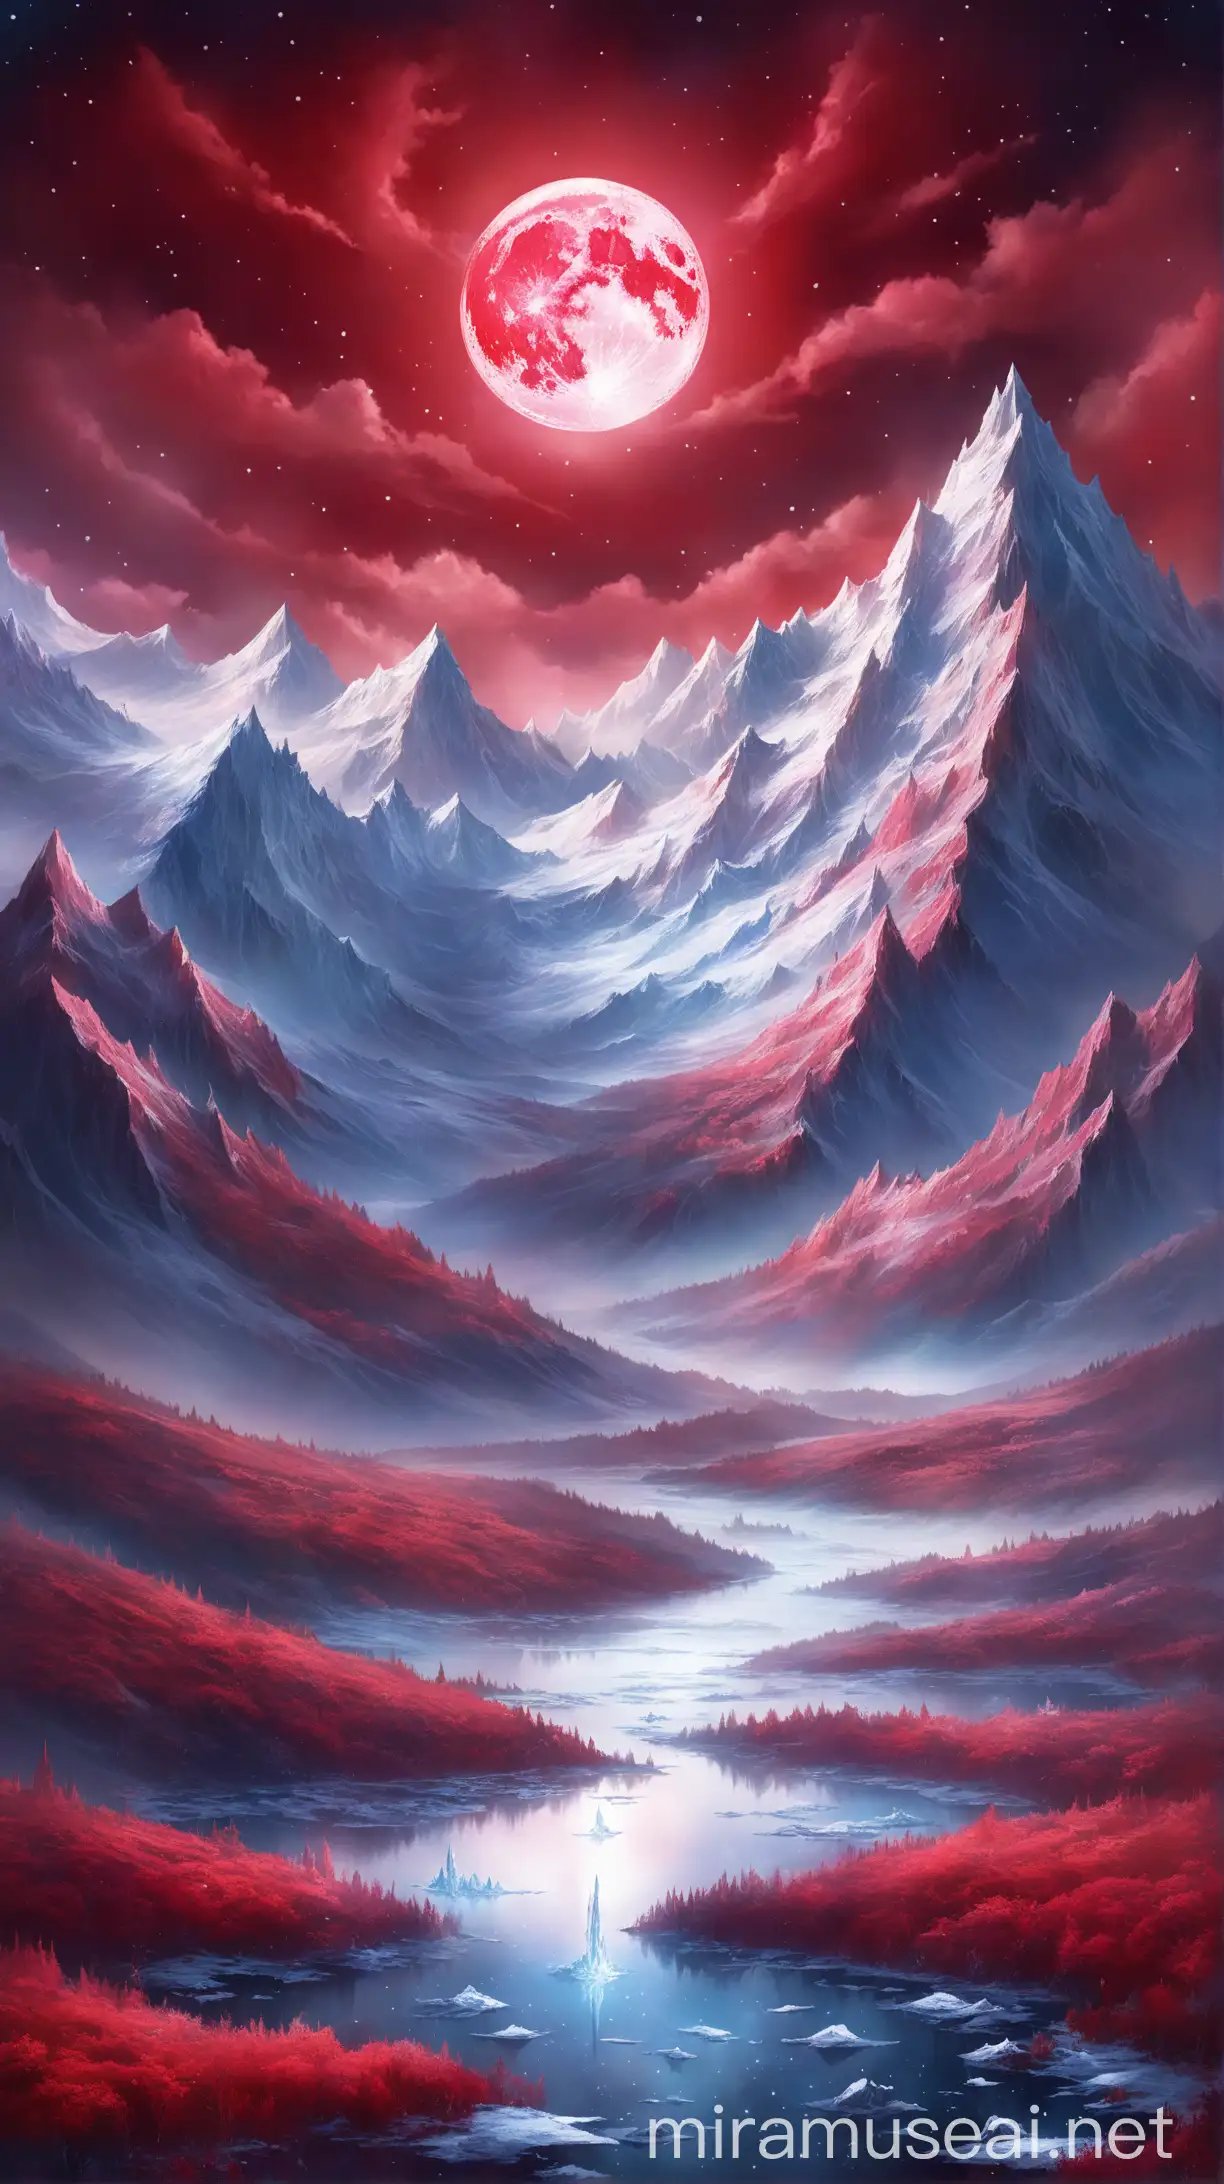 Behold an enchanting fantasy scene where crimson hues bathe majestic mountains under a vast, otherworldly moon. captures a mystical moment frozen in time, where adventure beckons in the serene, yet awe-inspiring landscape.